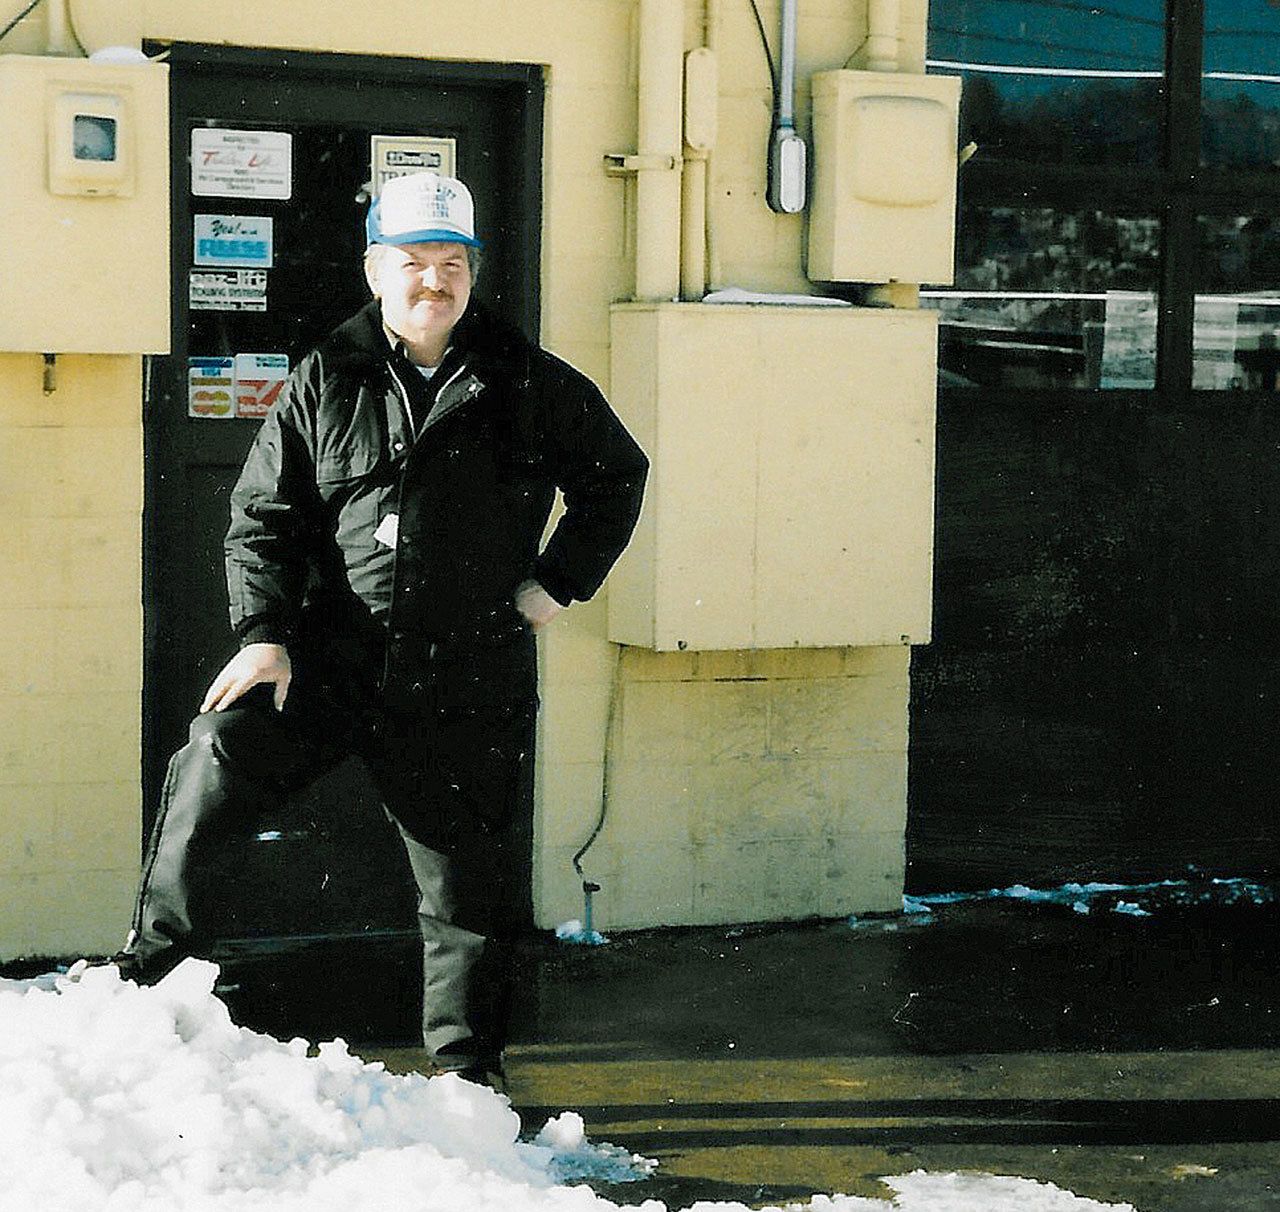 Torklift Central founder Jon Kay stands in front of the Kent location on Central Avenue around the time it first opened in 1976. Kay died on Feb. 2 at the age of 76. Courtesy Photo/Torklift Central